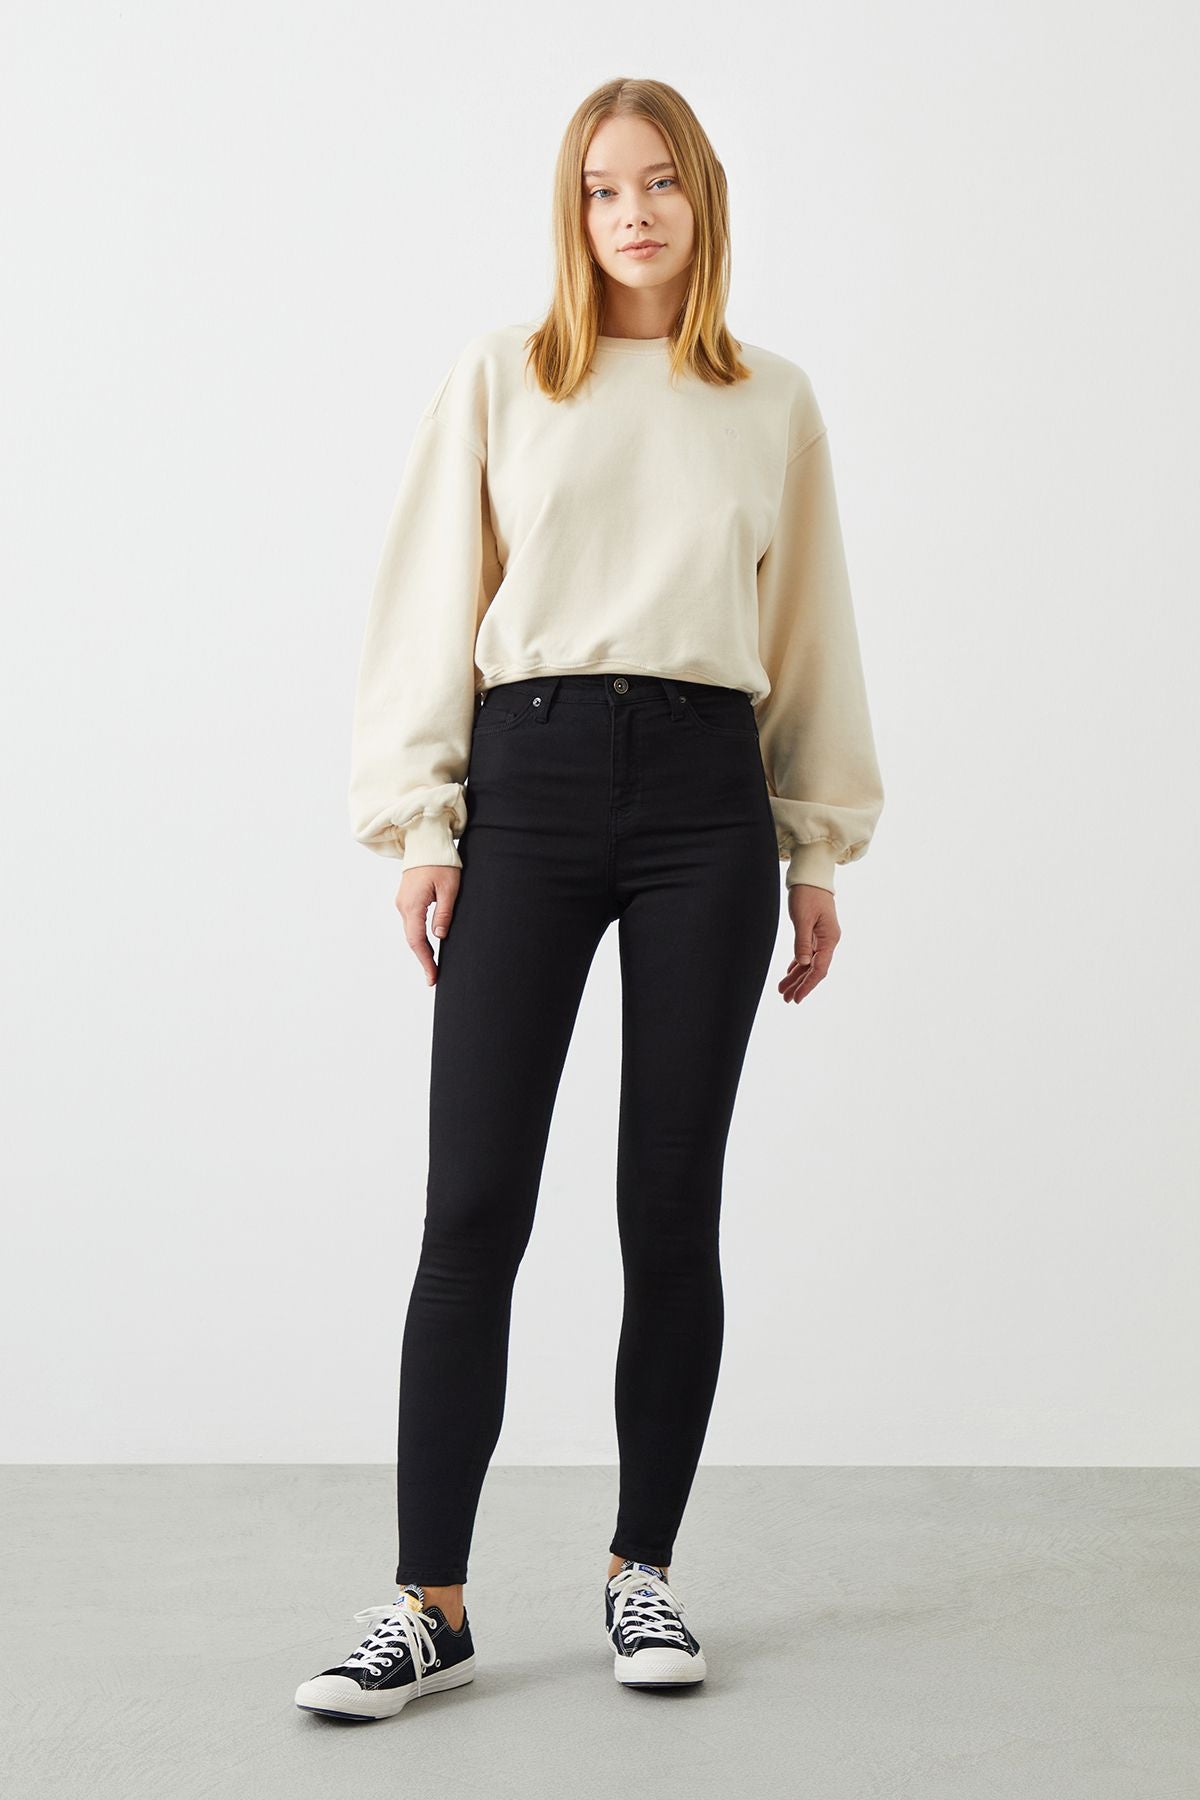 Stylish outfit featuring black slim jeans from sustainable brand RA Denim paired with an off-white organic cotton sweater.